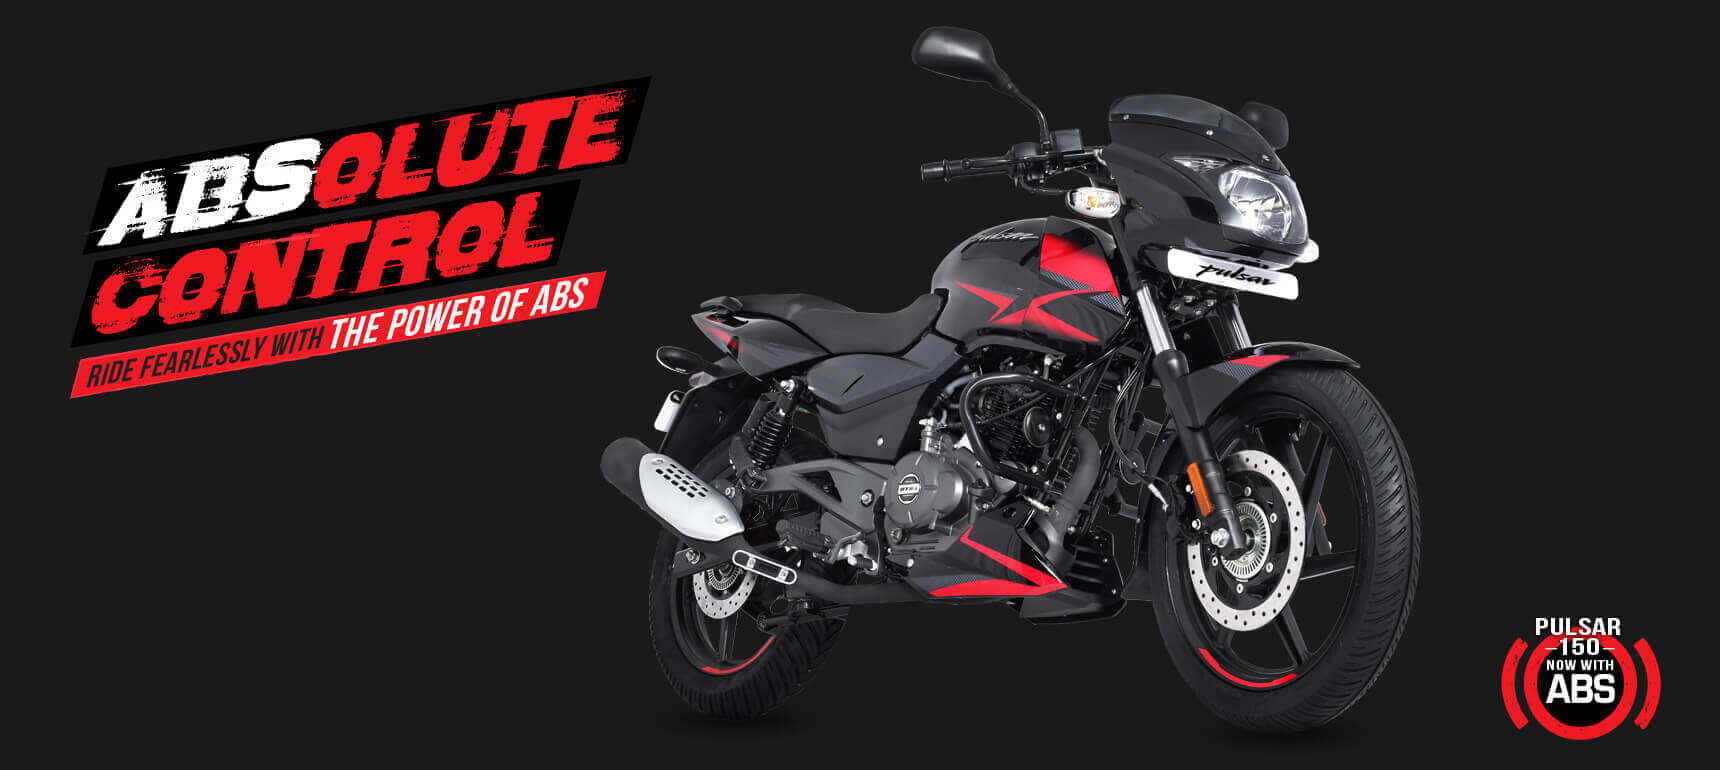 Black and red color Bajaj Pulsar 150 Twin Disk Motorcycle with ABS